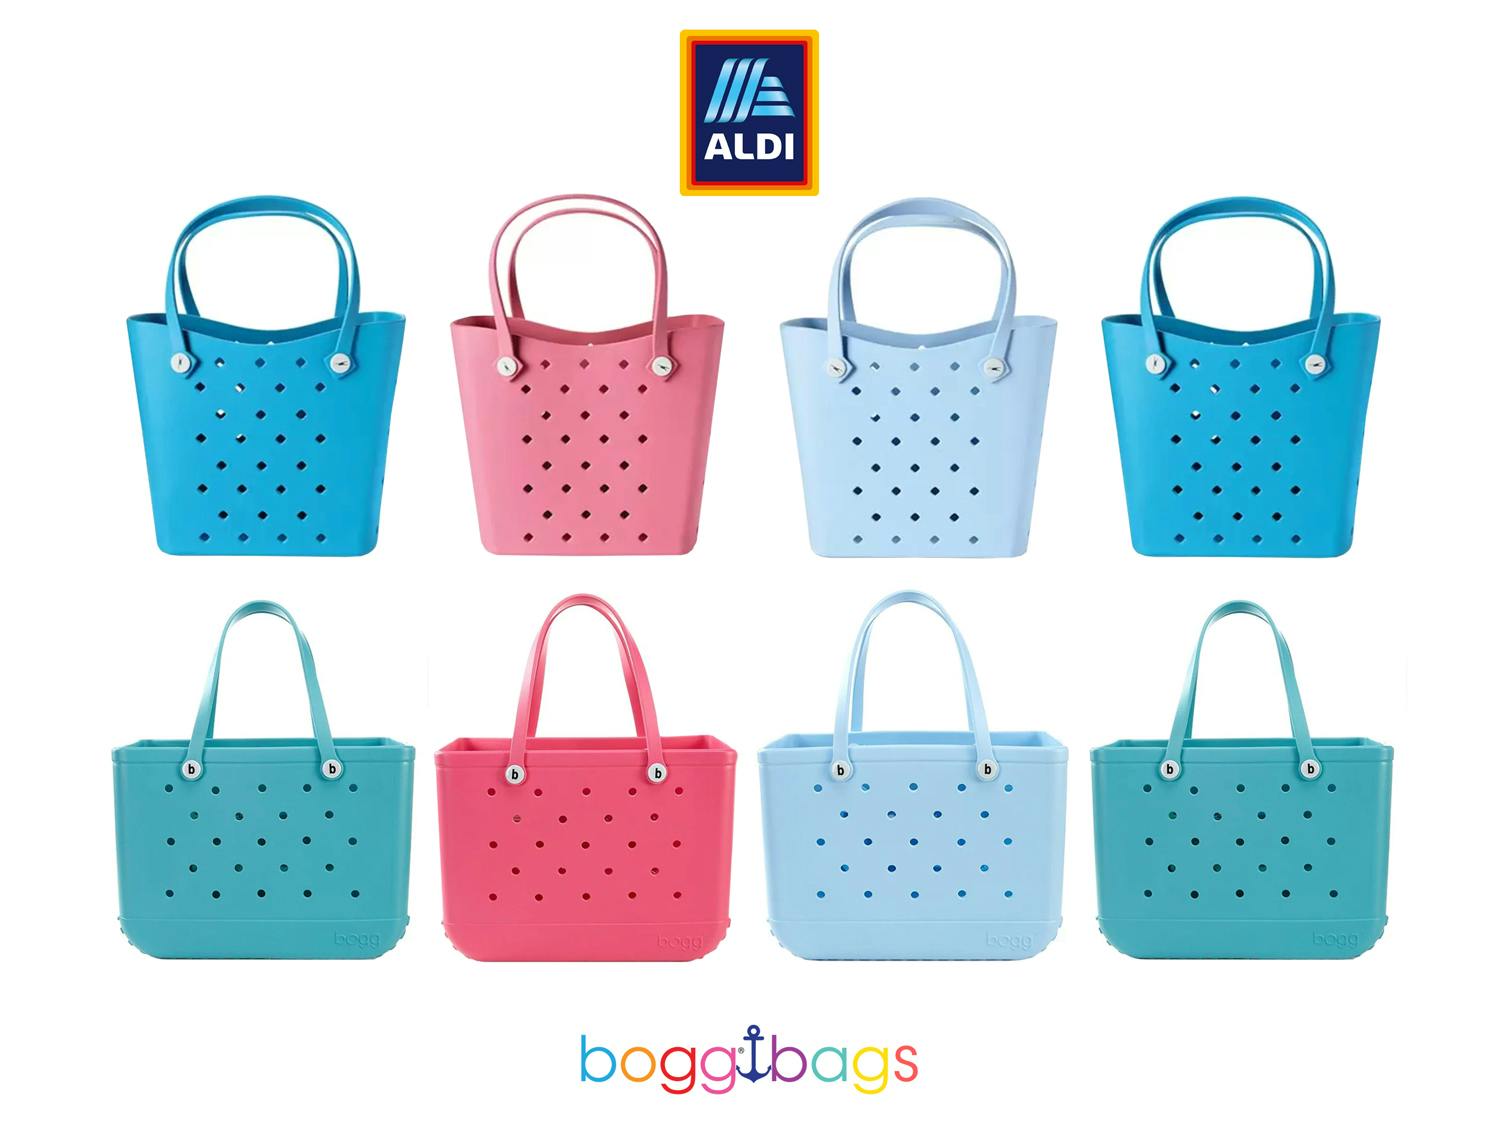 Best Bogg Bag Dupe - 1/2 The Price!